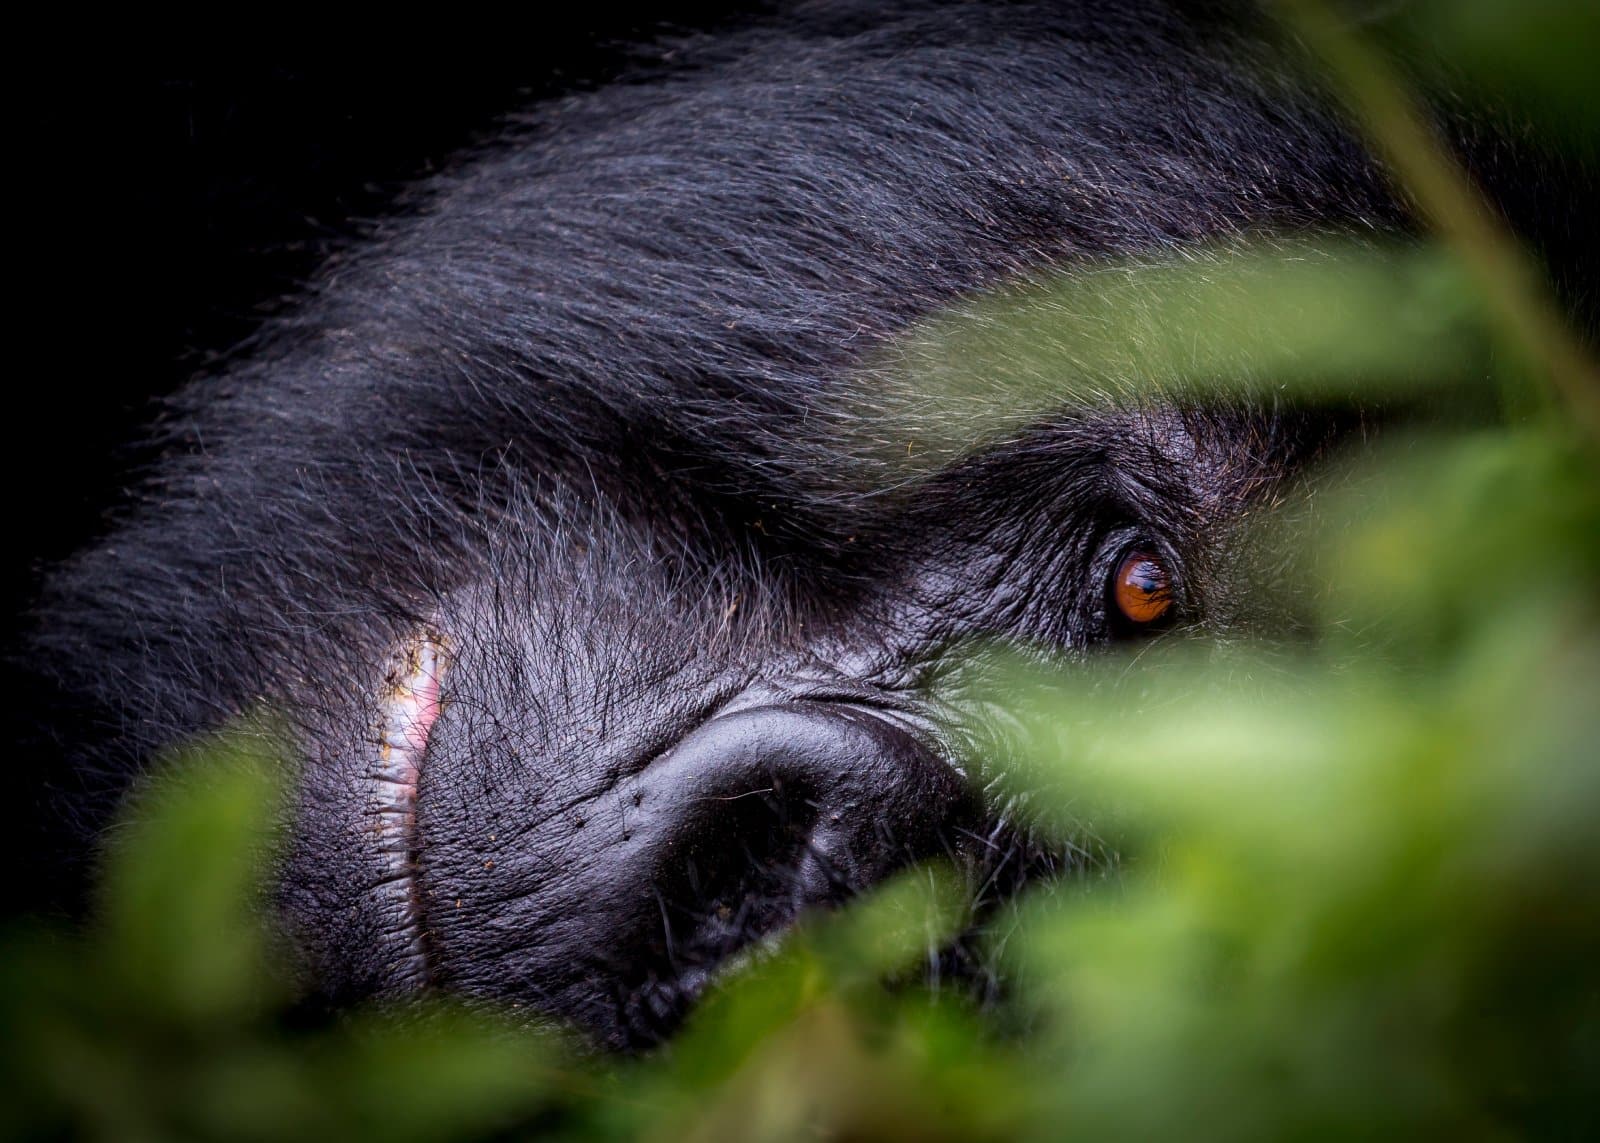 <p class="wp-caption-text">Image Credit: Shutterstock / Holger Metzger</p>  <p>Home to mountain gorillas who have mastered the art of the “do not disturb” look better than any hotel guest.</p>